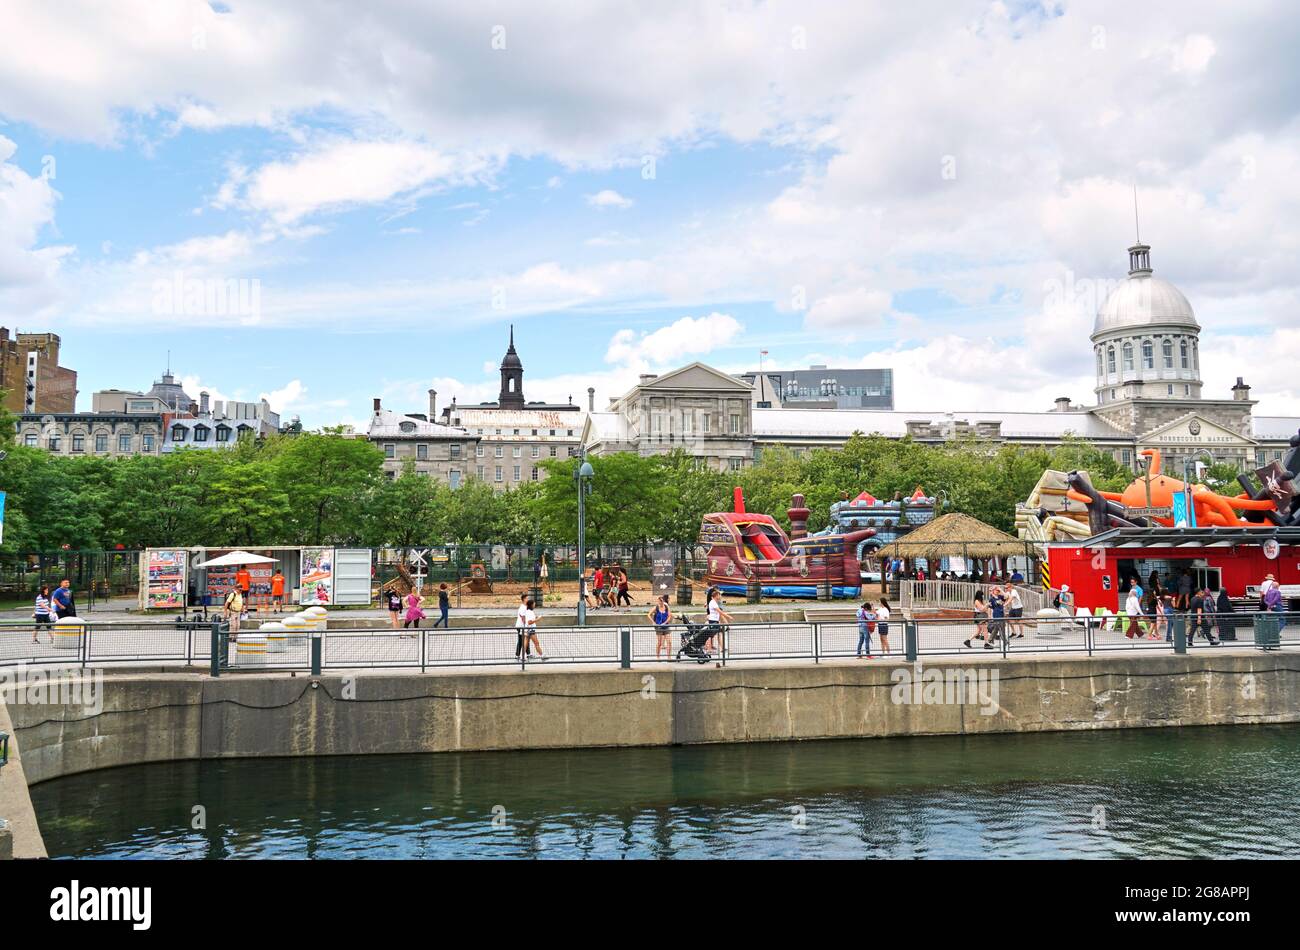 Canada, Montreal - July 11, 2021: Scenic view of Old Port of Montreal. Old Port is historic place, located in between Old Montreal and the St. Lawrenc Stock Photo